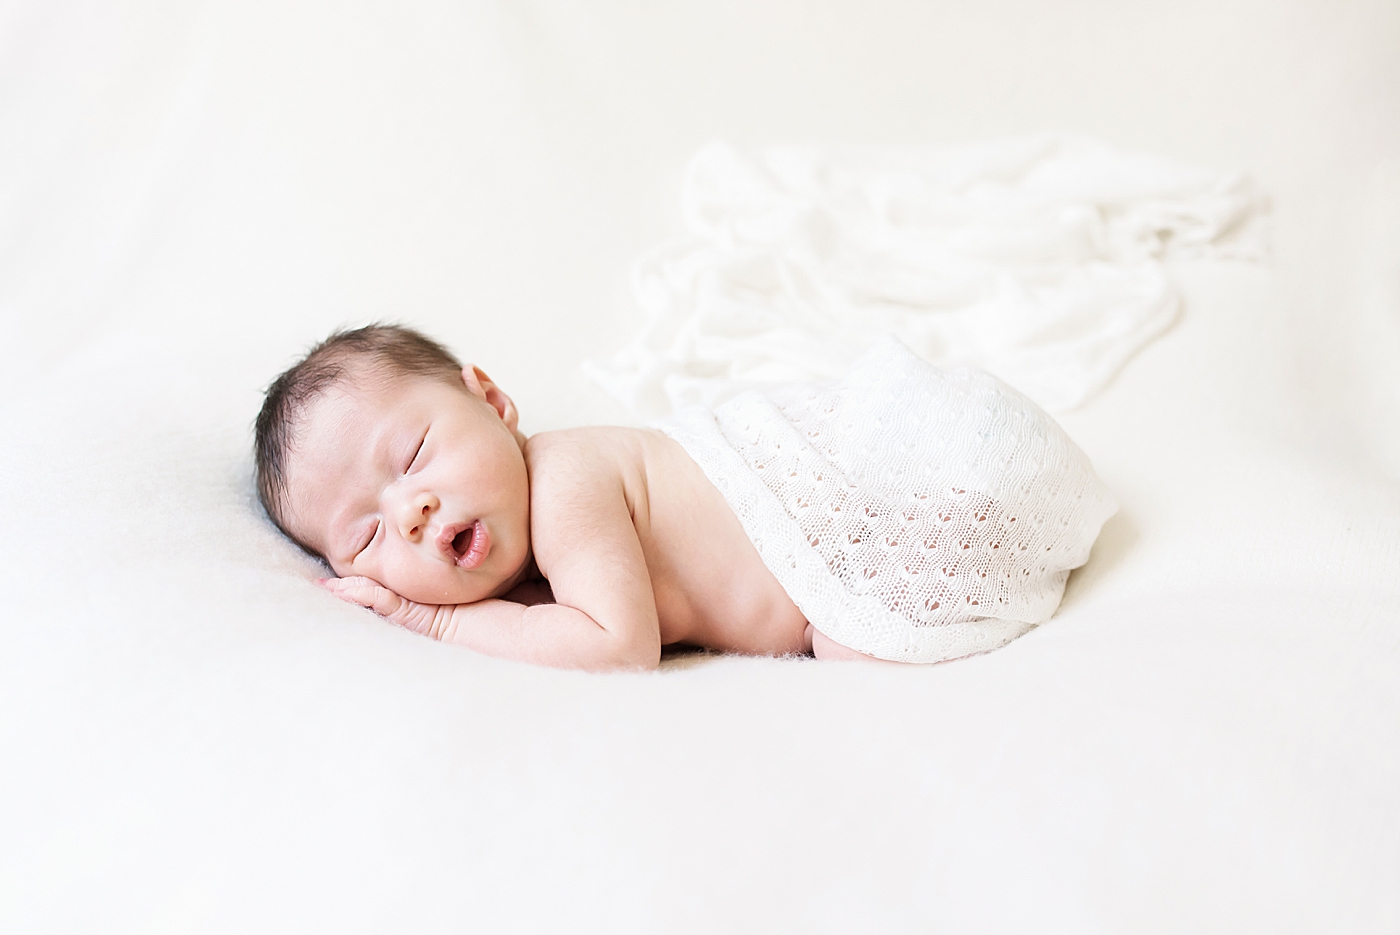 Sleeping newborn baby girl wrapped in a white blanket | Photo by Anna Wisjo Photography